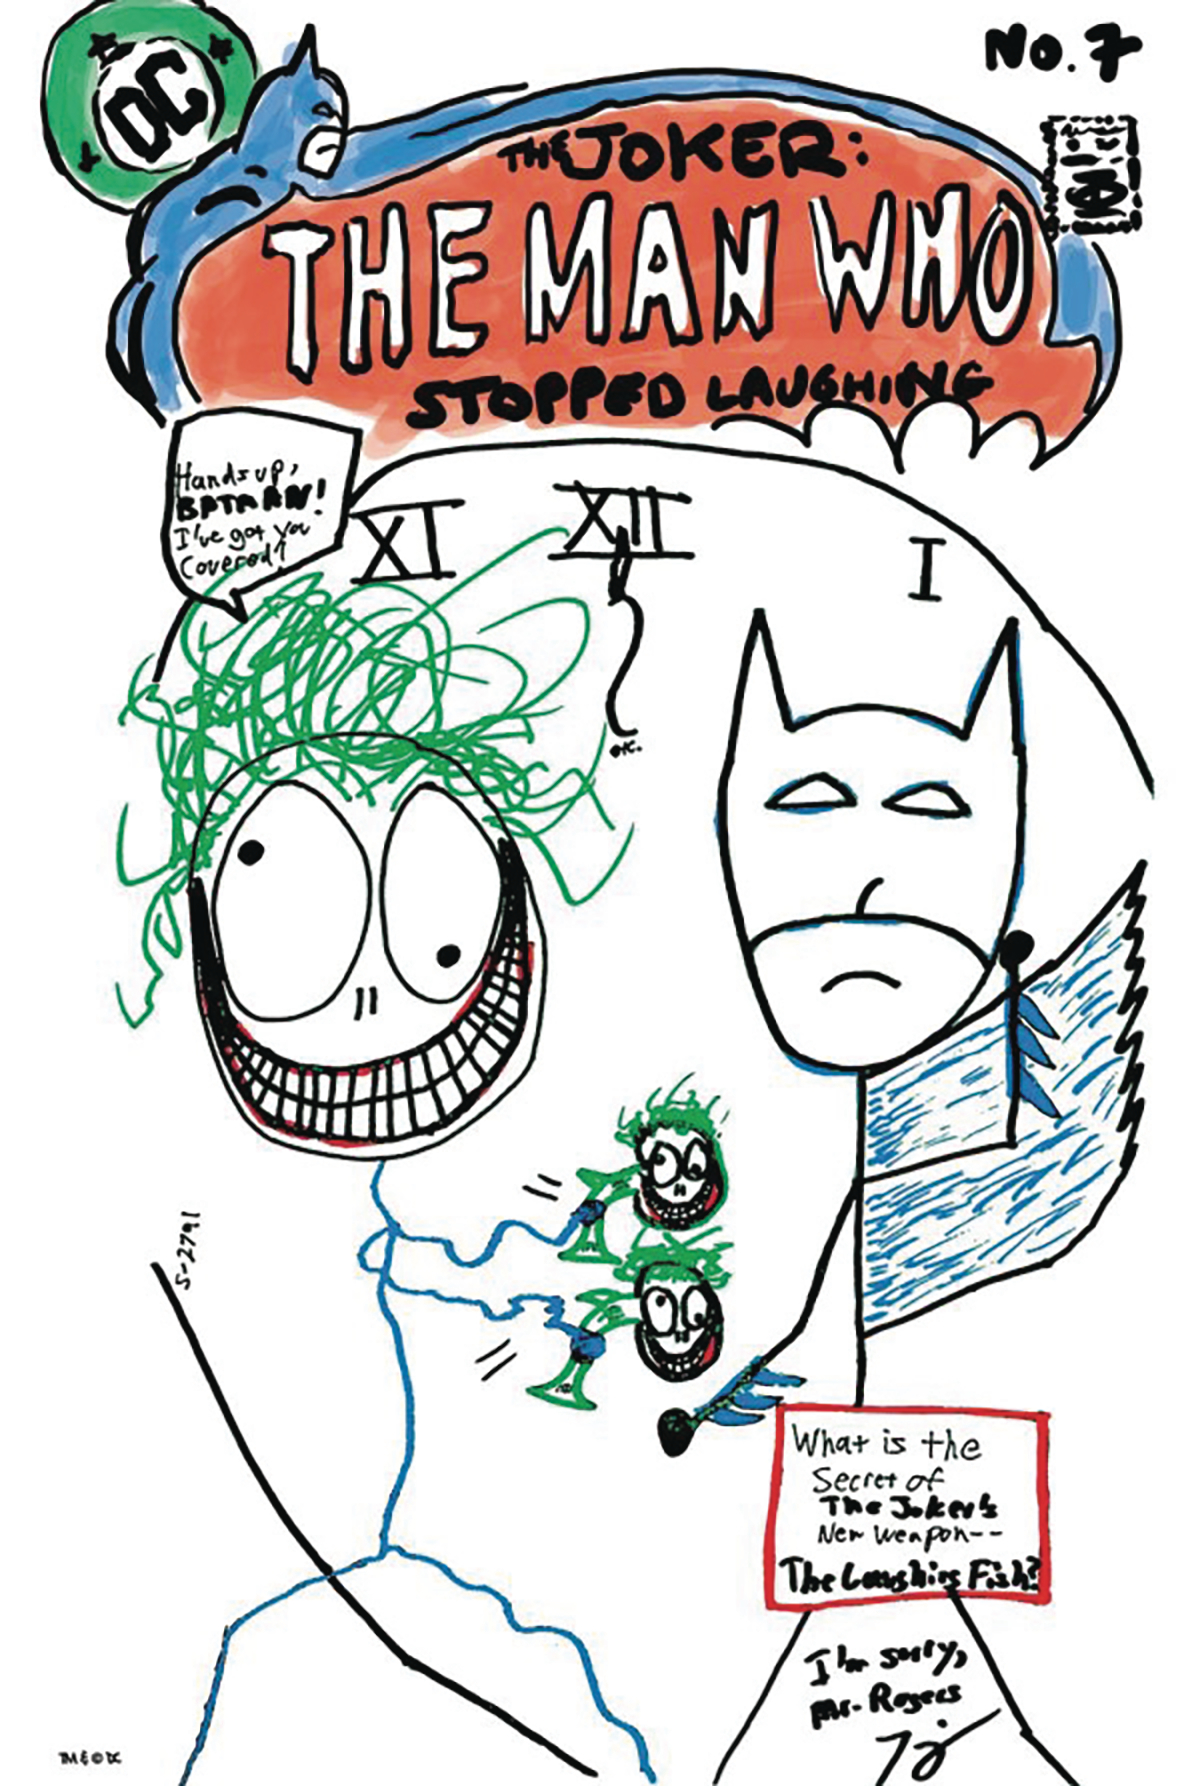 Dynamic Forces Joker Man Who Stopped Laughing #7 April Fools King Signed